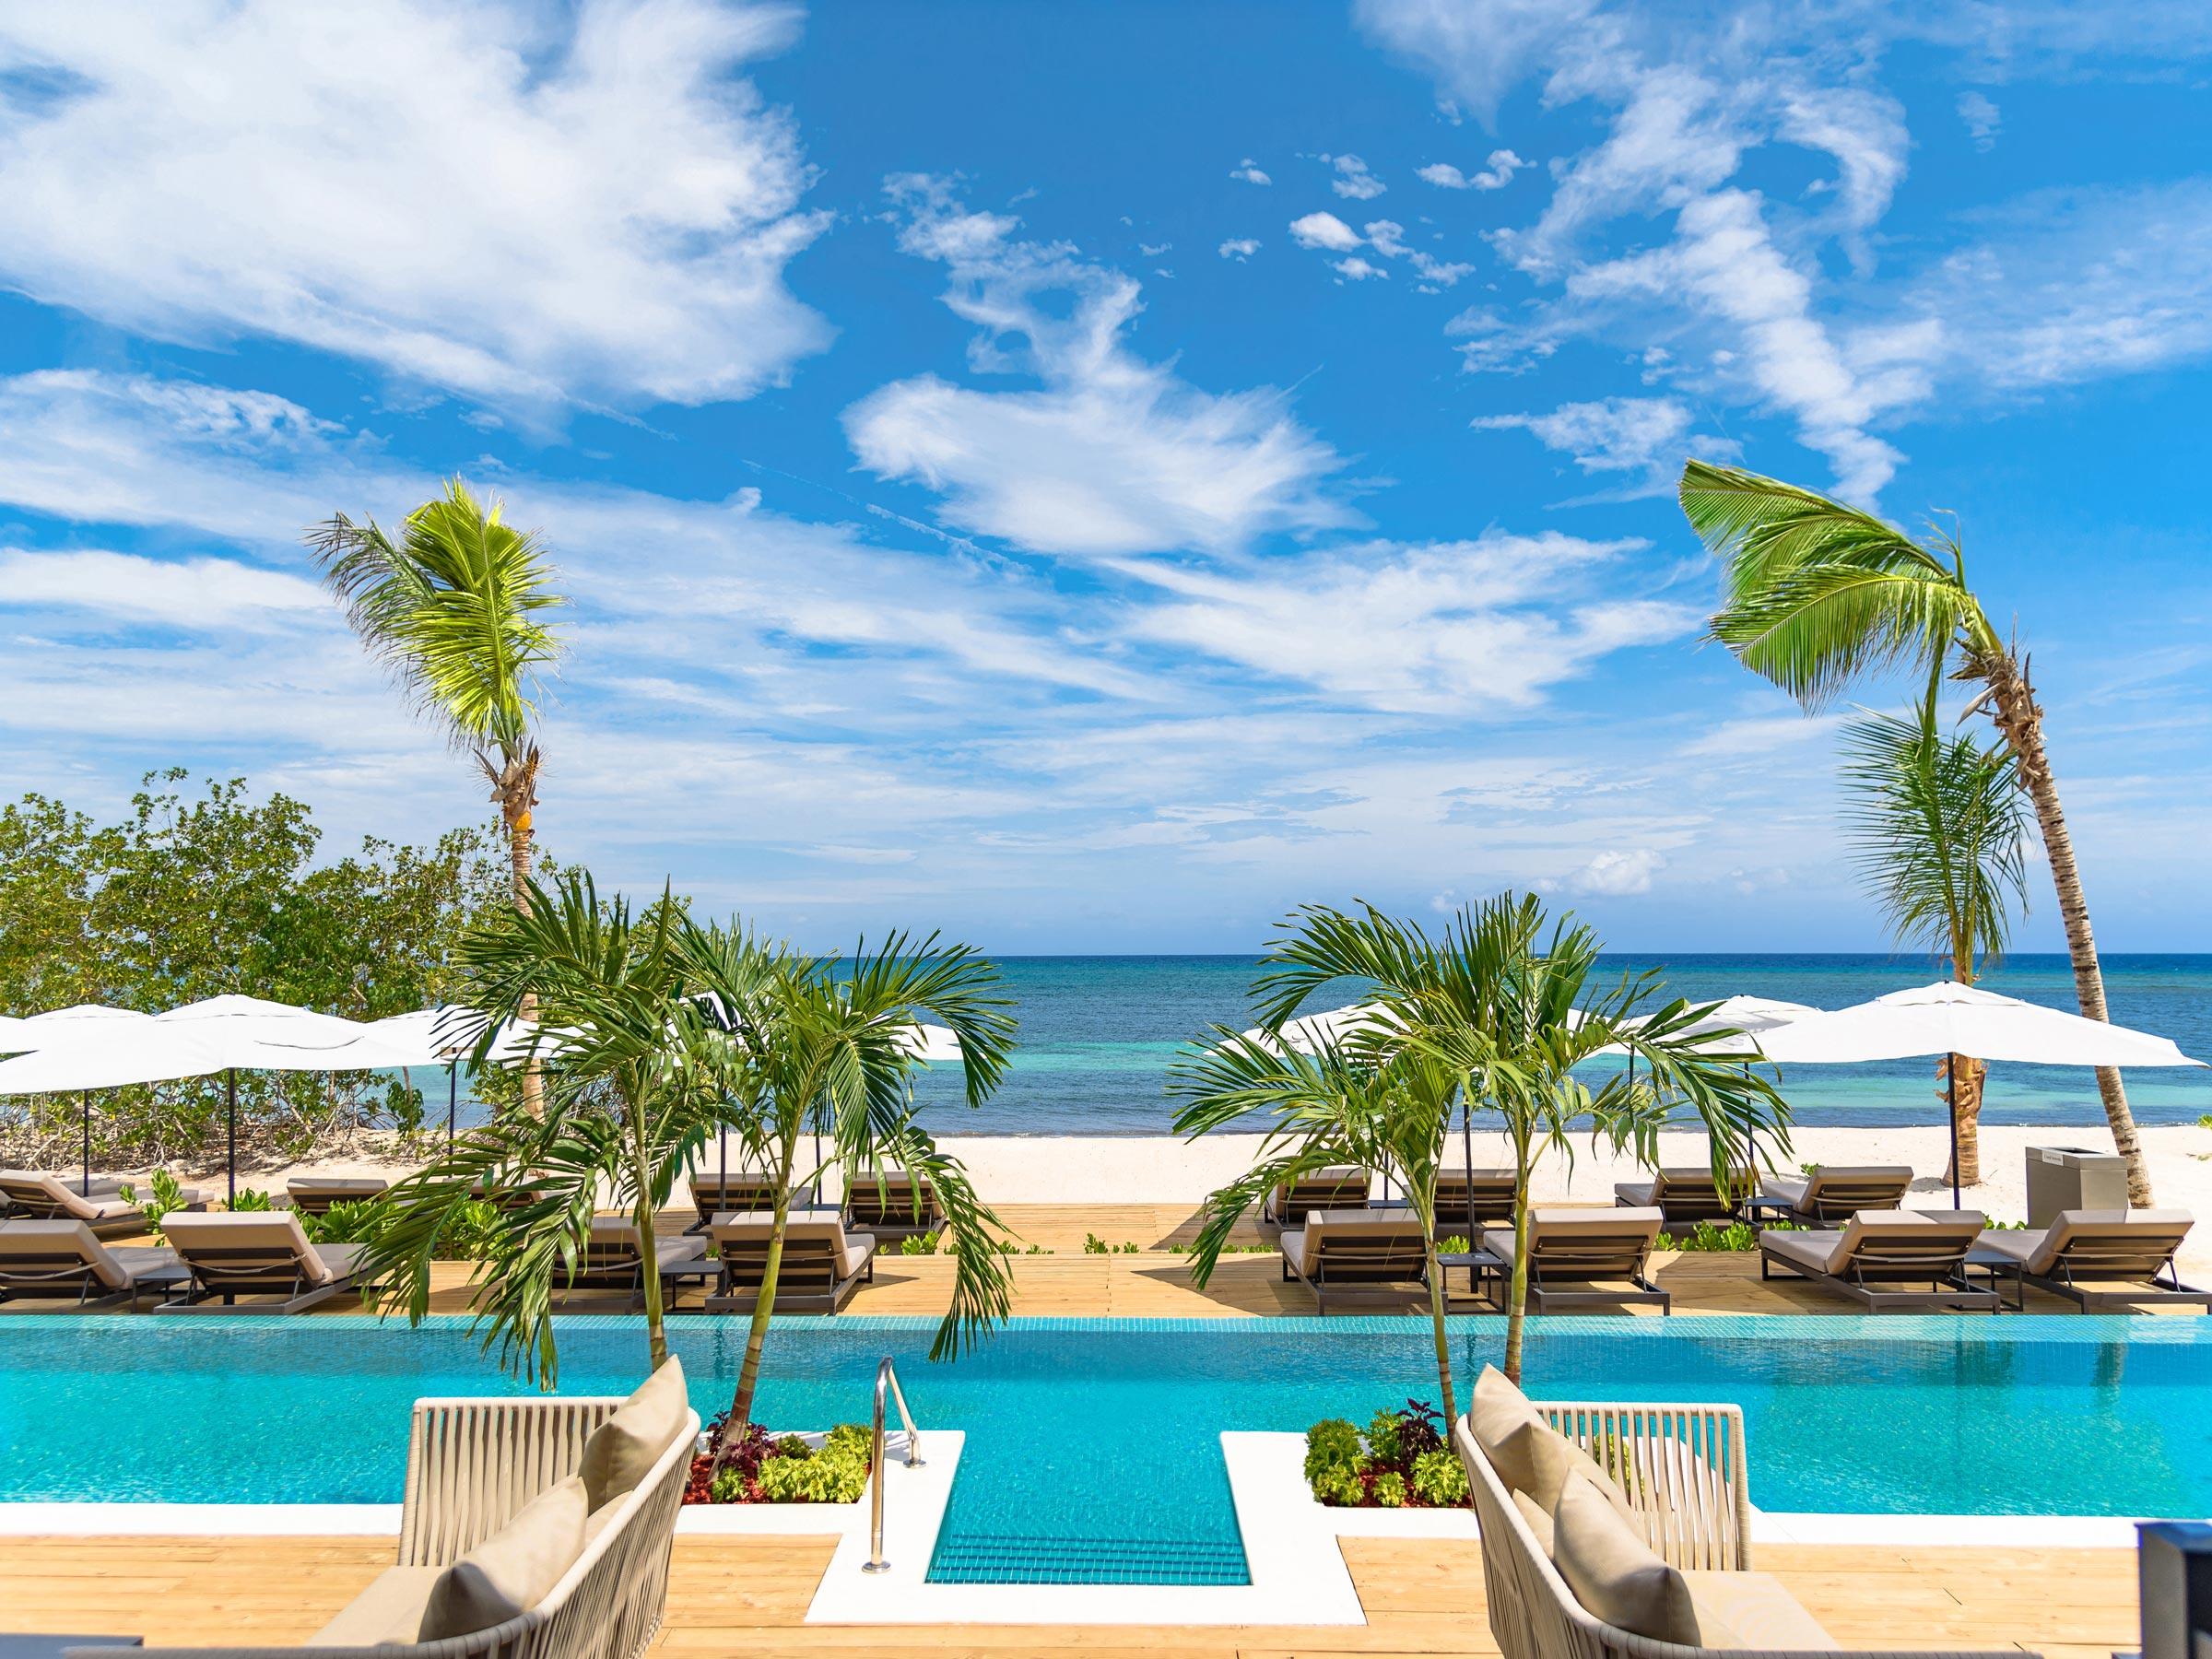 The Excellence Collection Announces Multi-Million Dollar Investment To Revamp Its All-Inclusive Resorts In The Caribbean